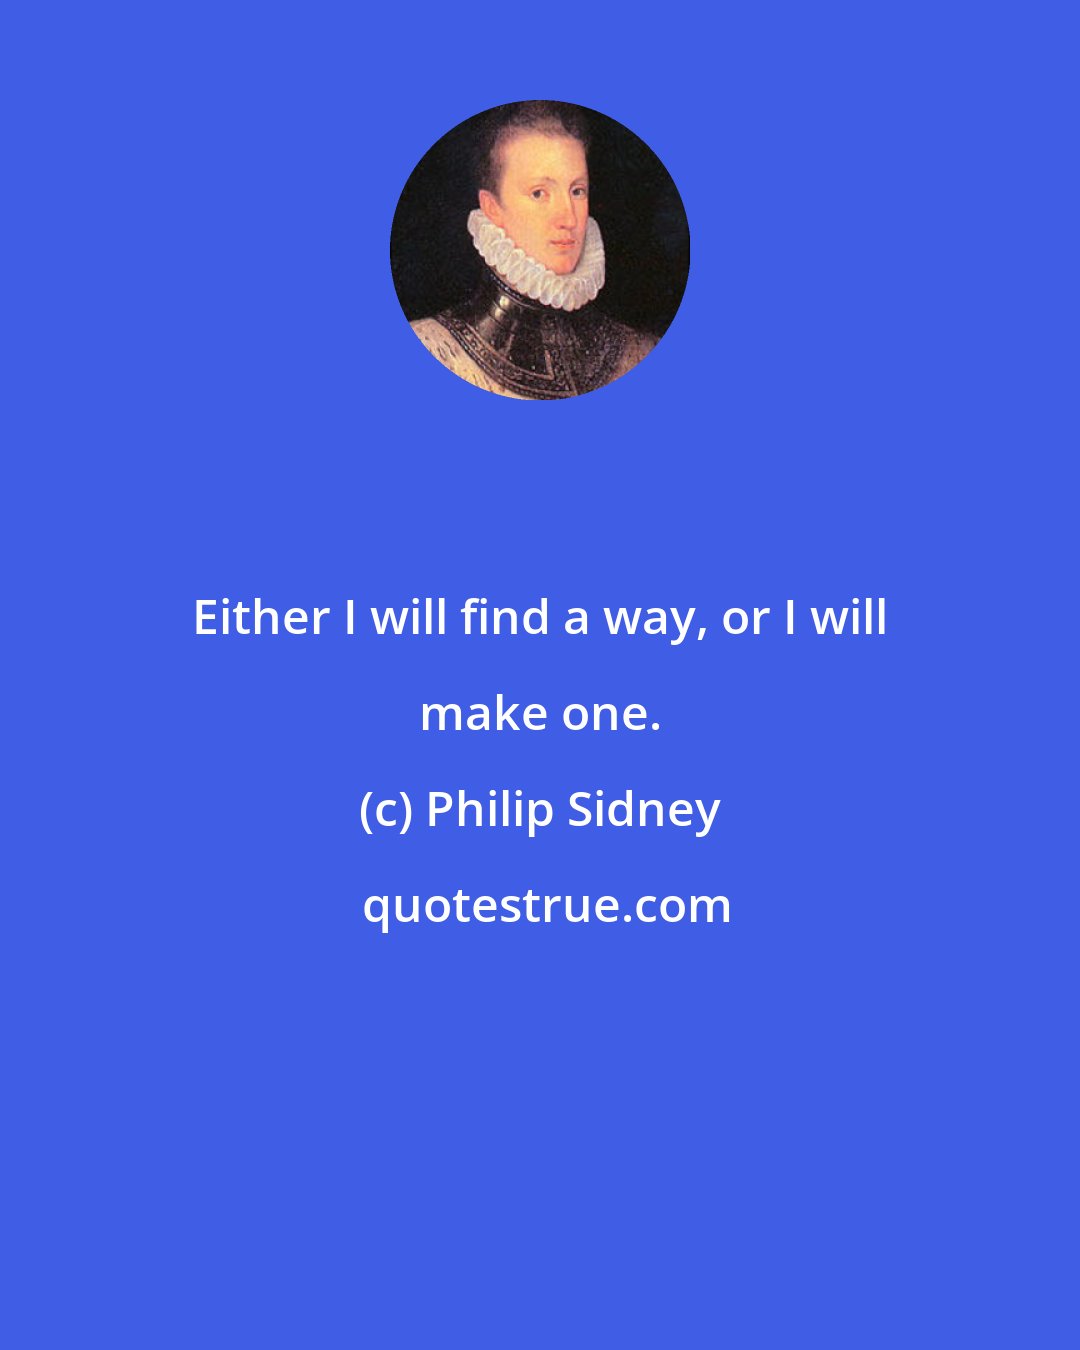 Philip Sidney: Either I will find a way, or I will make one.